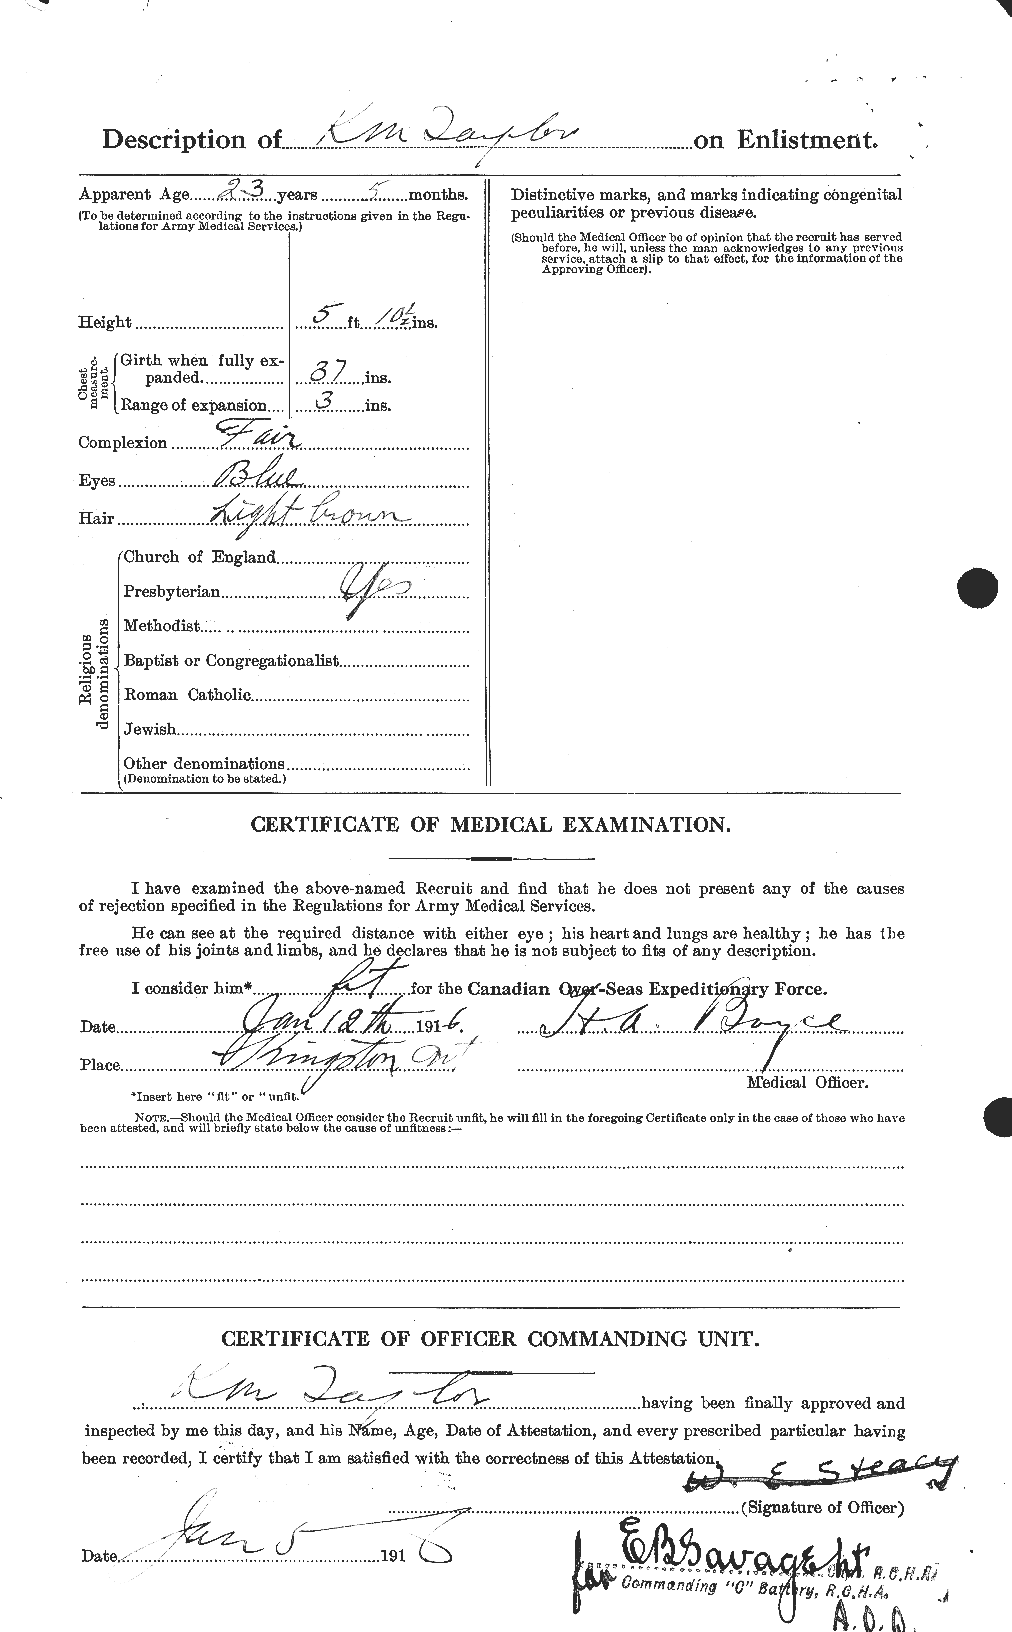 Personnel Records of the First World War - CEF 627599b